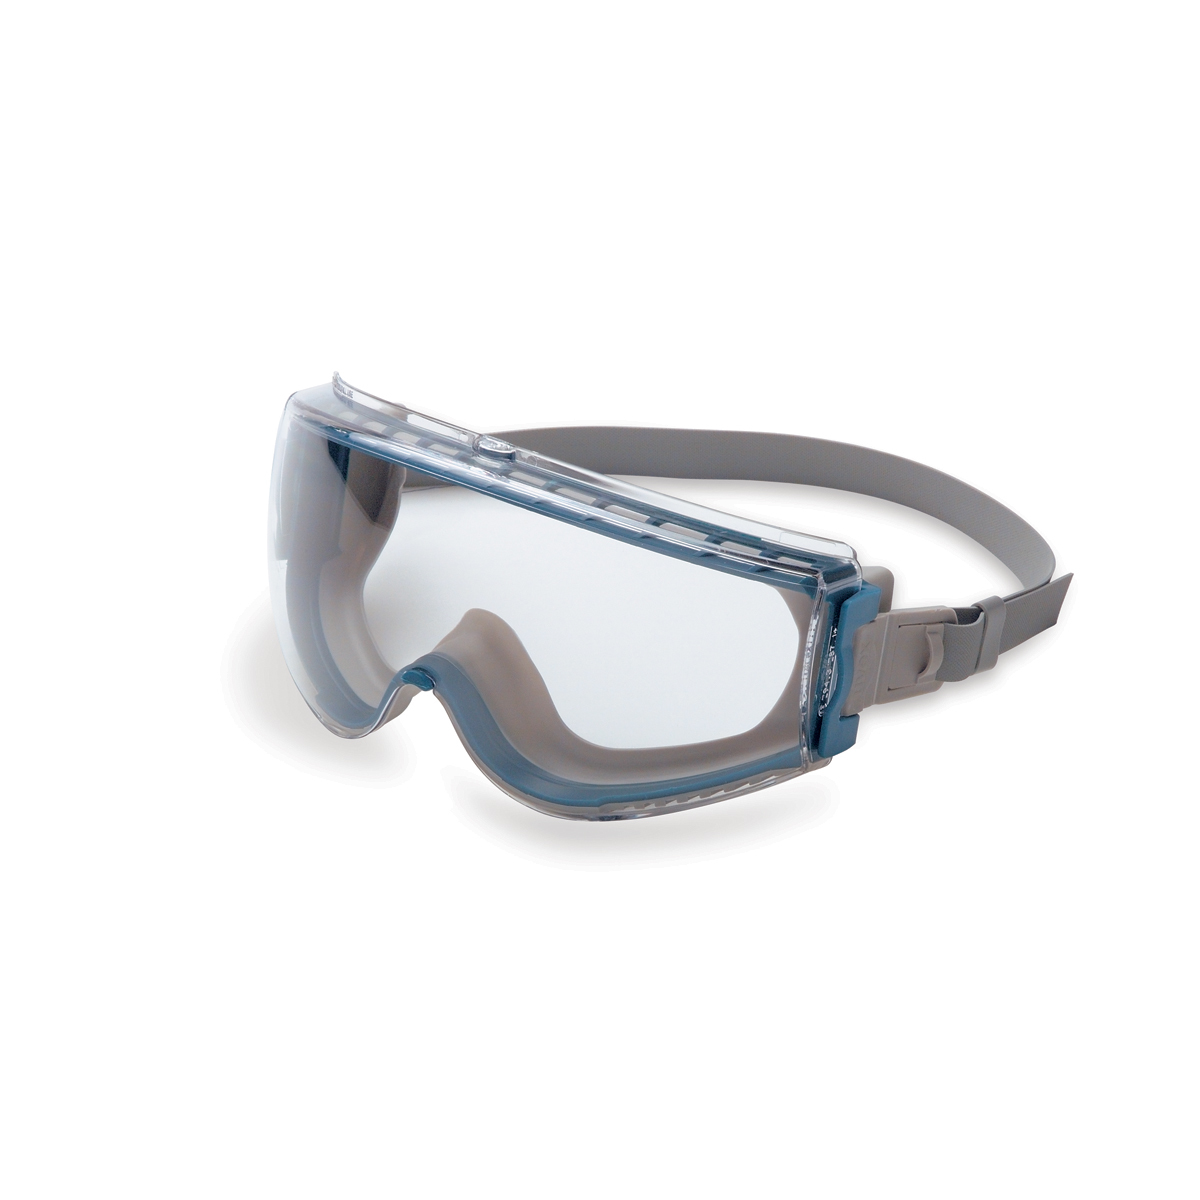 Honeywell Uvex Stealth® Indirect Vent Chemical Splash/Impact Goggles With Teal Low Profile Frame And Clear HydroShield® Anti-Fog